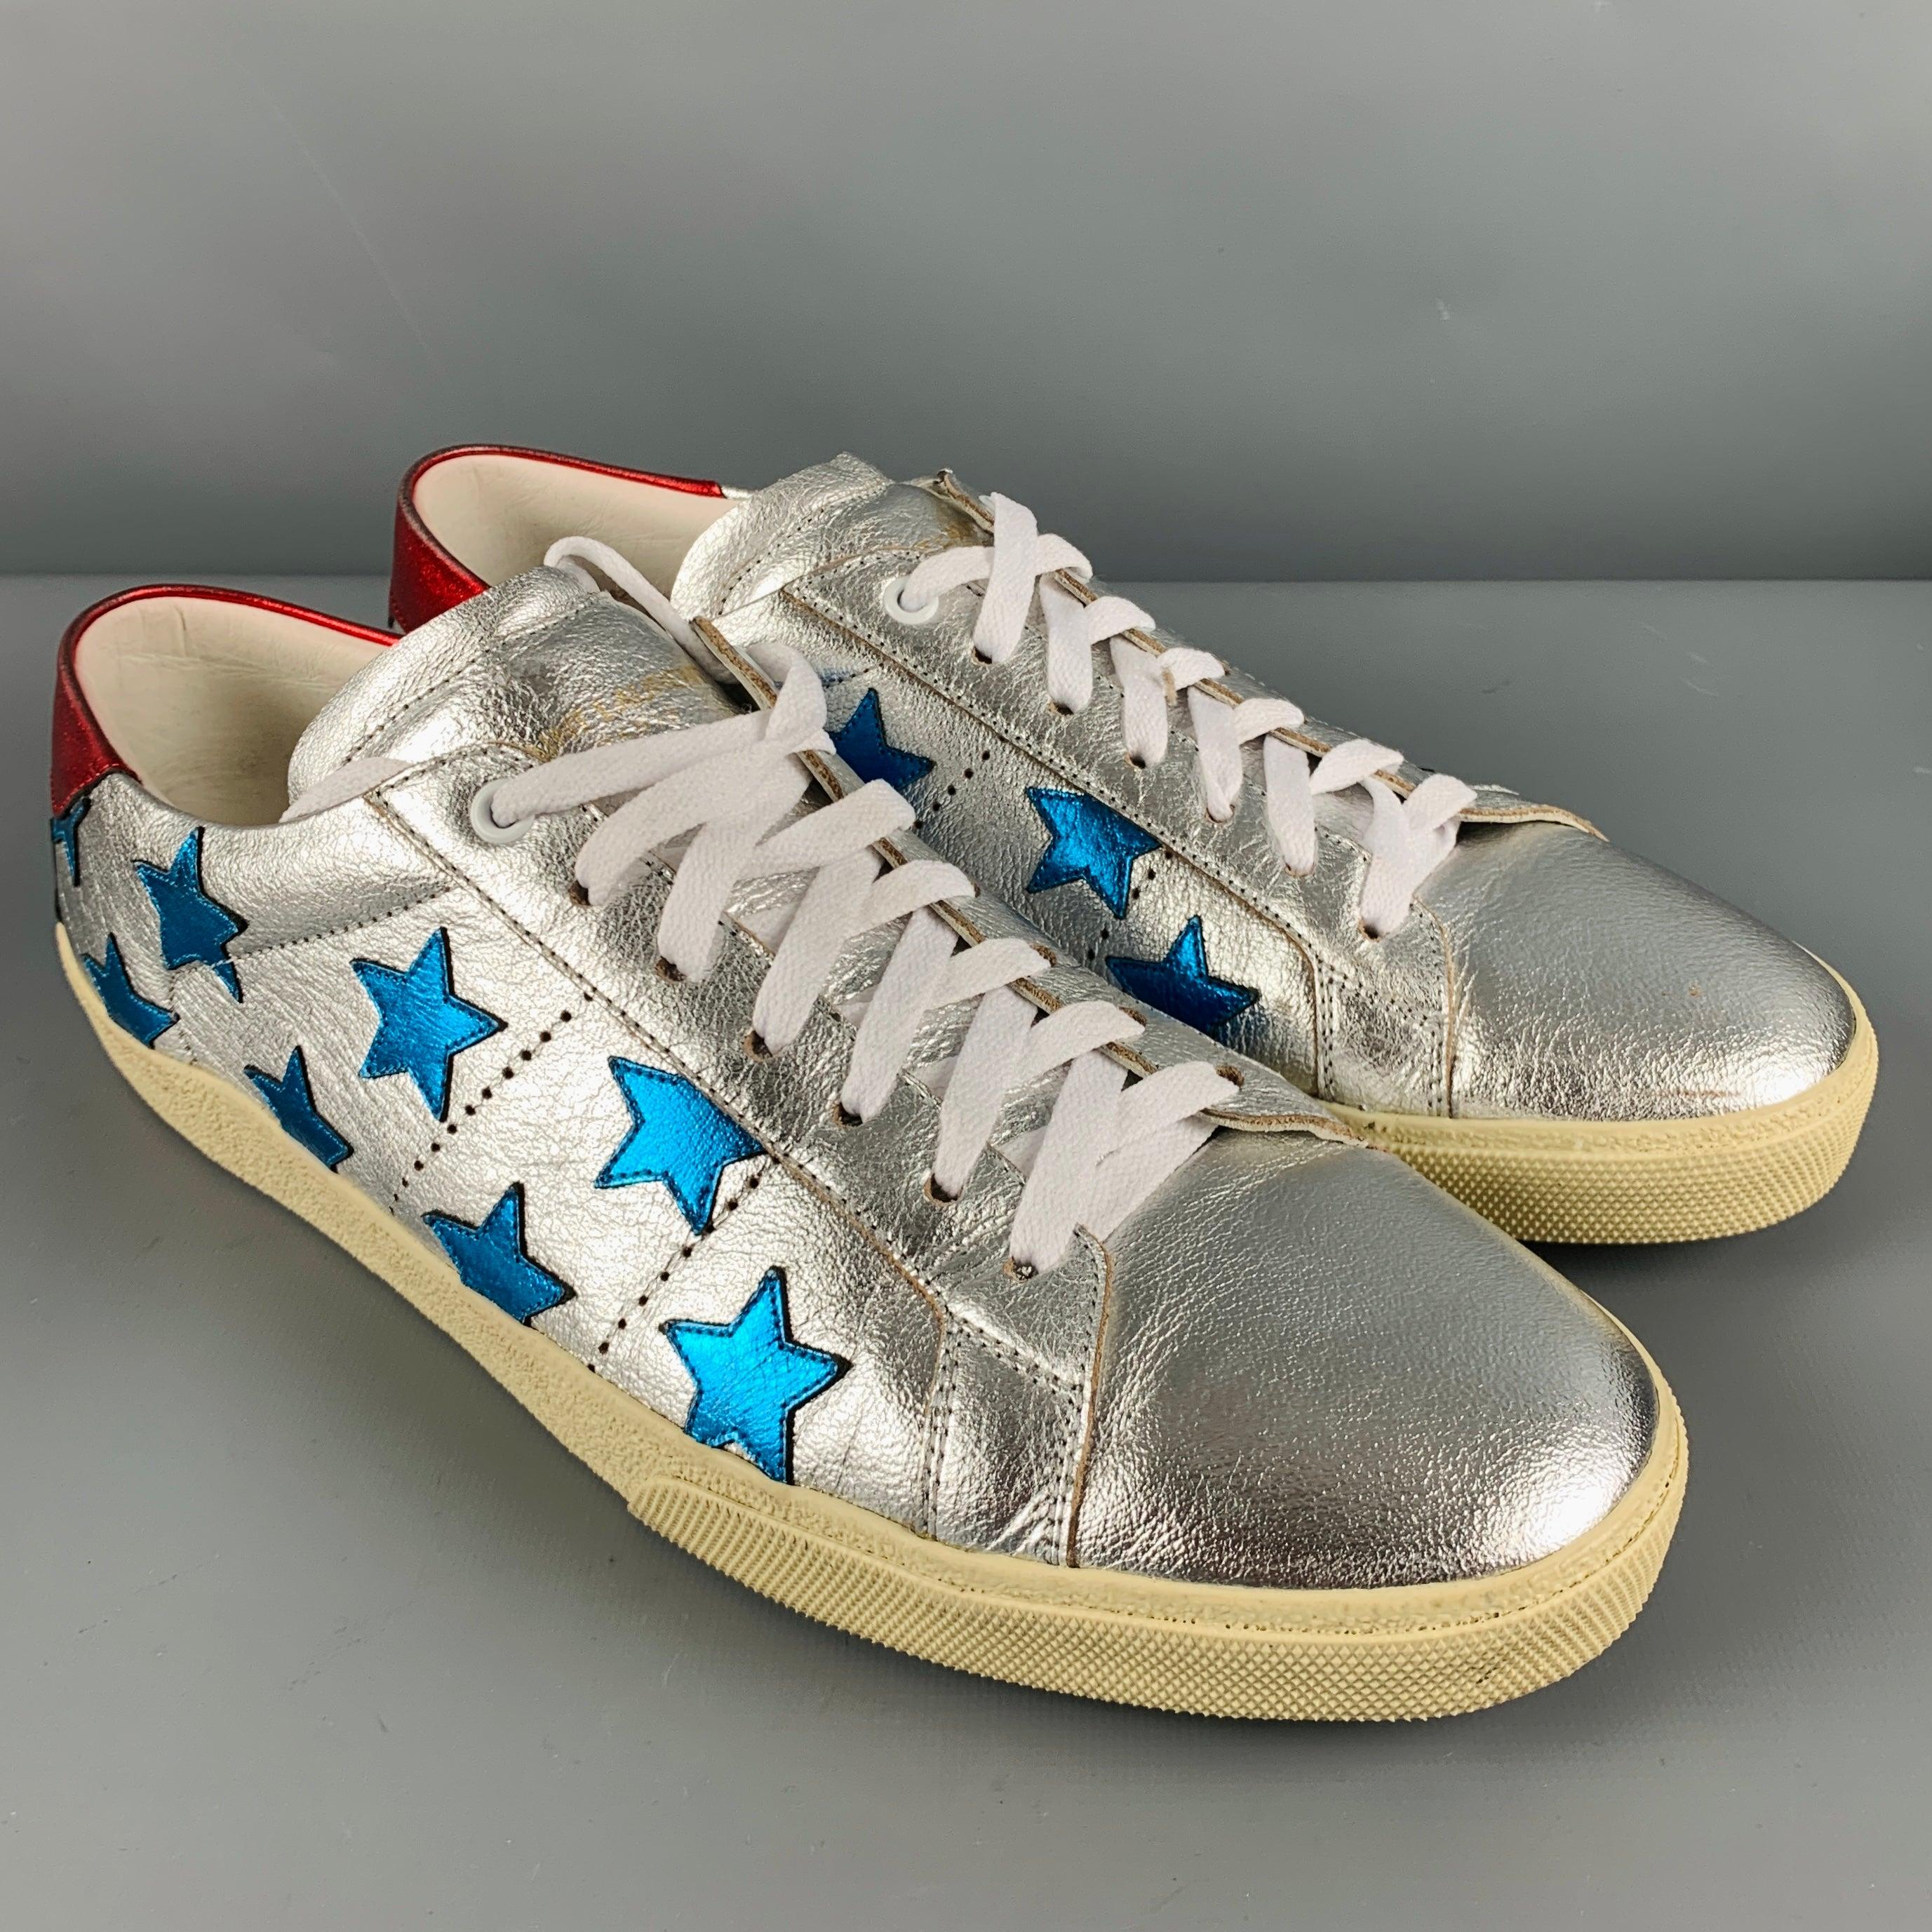 SAINT LAURENT sneakers
in a 
metallic silver leather fabric featuring a low top style, blue star appliques, red heel detail, and lace-up closure. Comes with dust bag and box. Made in Spainches Very Good Pre-Owned Condition. Minor signs of wear.